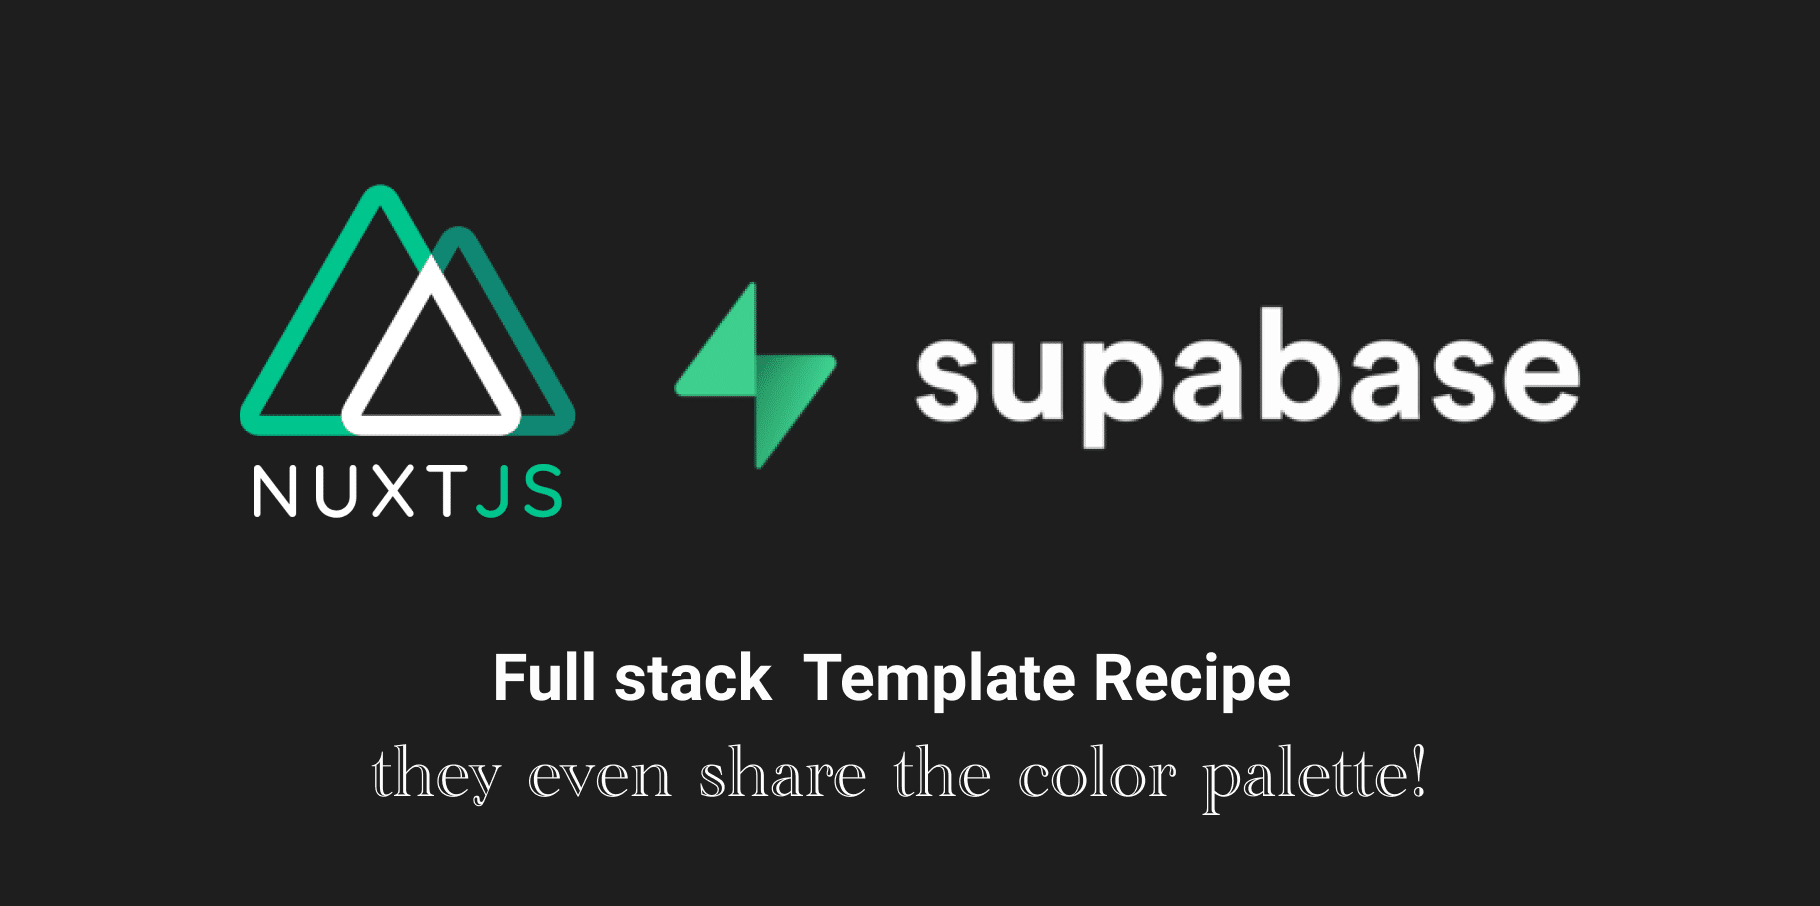 2021-03-12-nuxt-with-supabase-template-recipe